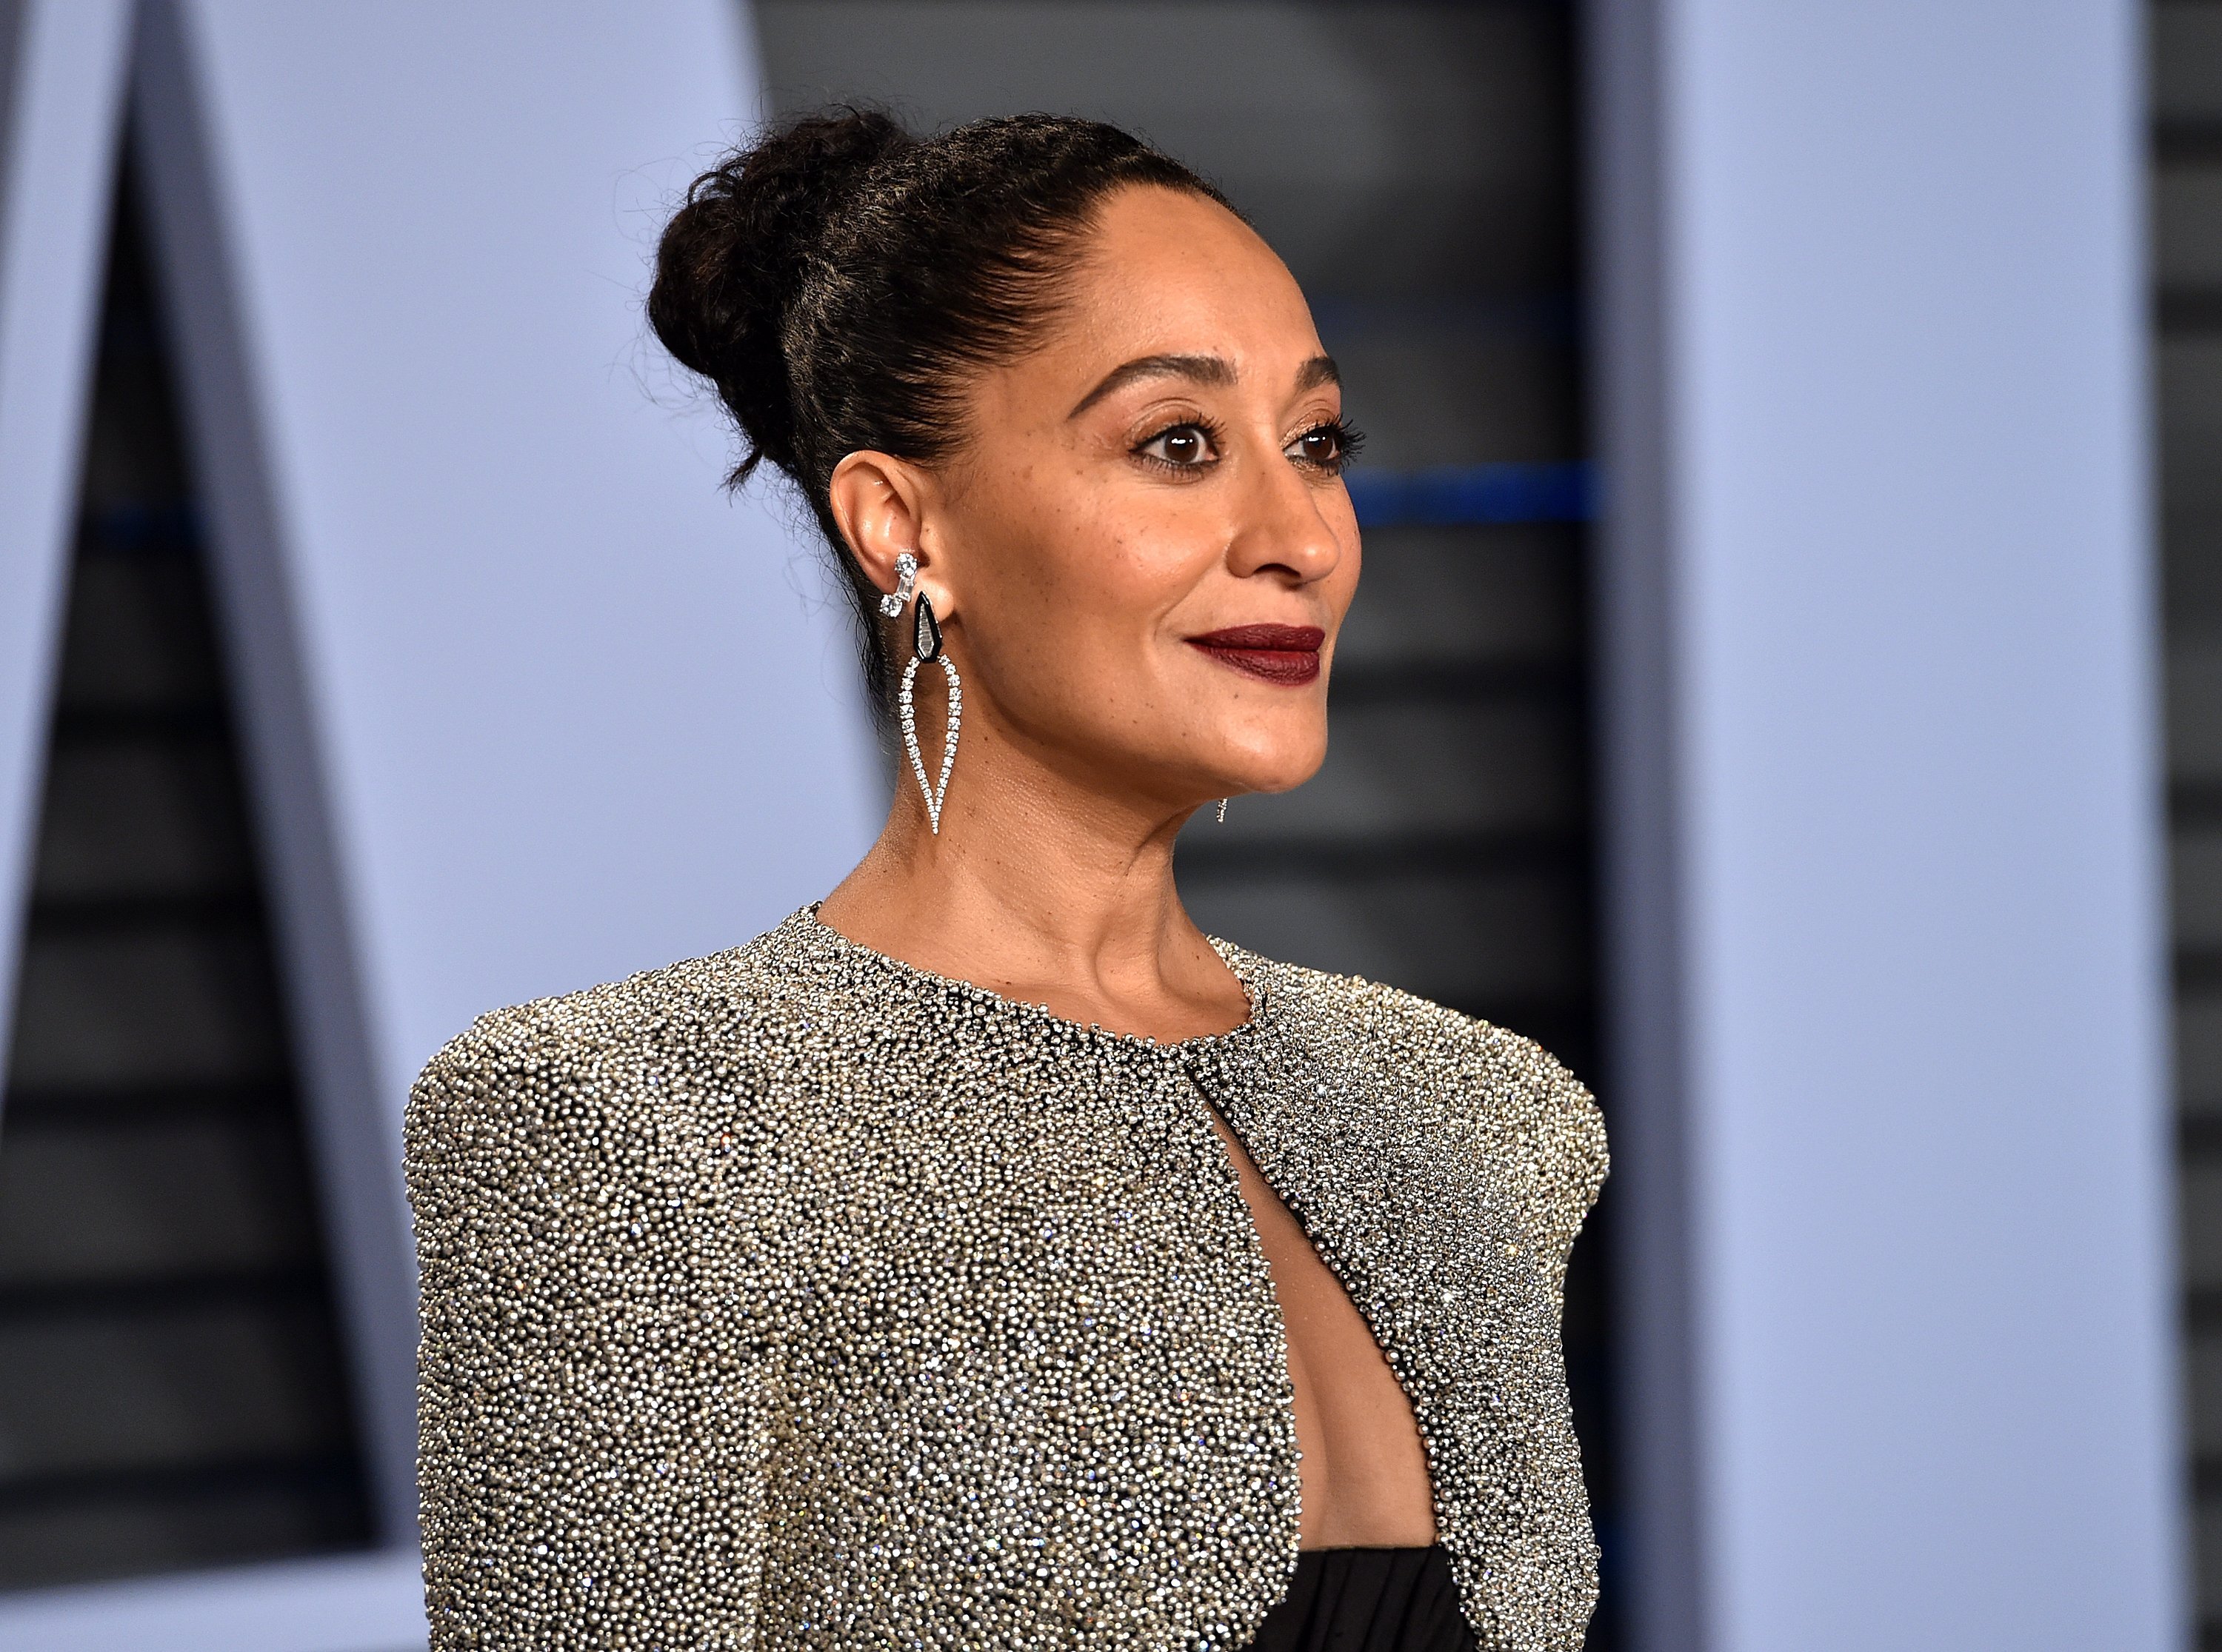 Tracee Ellis Ross at the 2018 Vanity Fair Oscar Party on March 04, 2018 | Photo: Getty Images